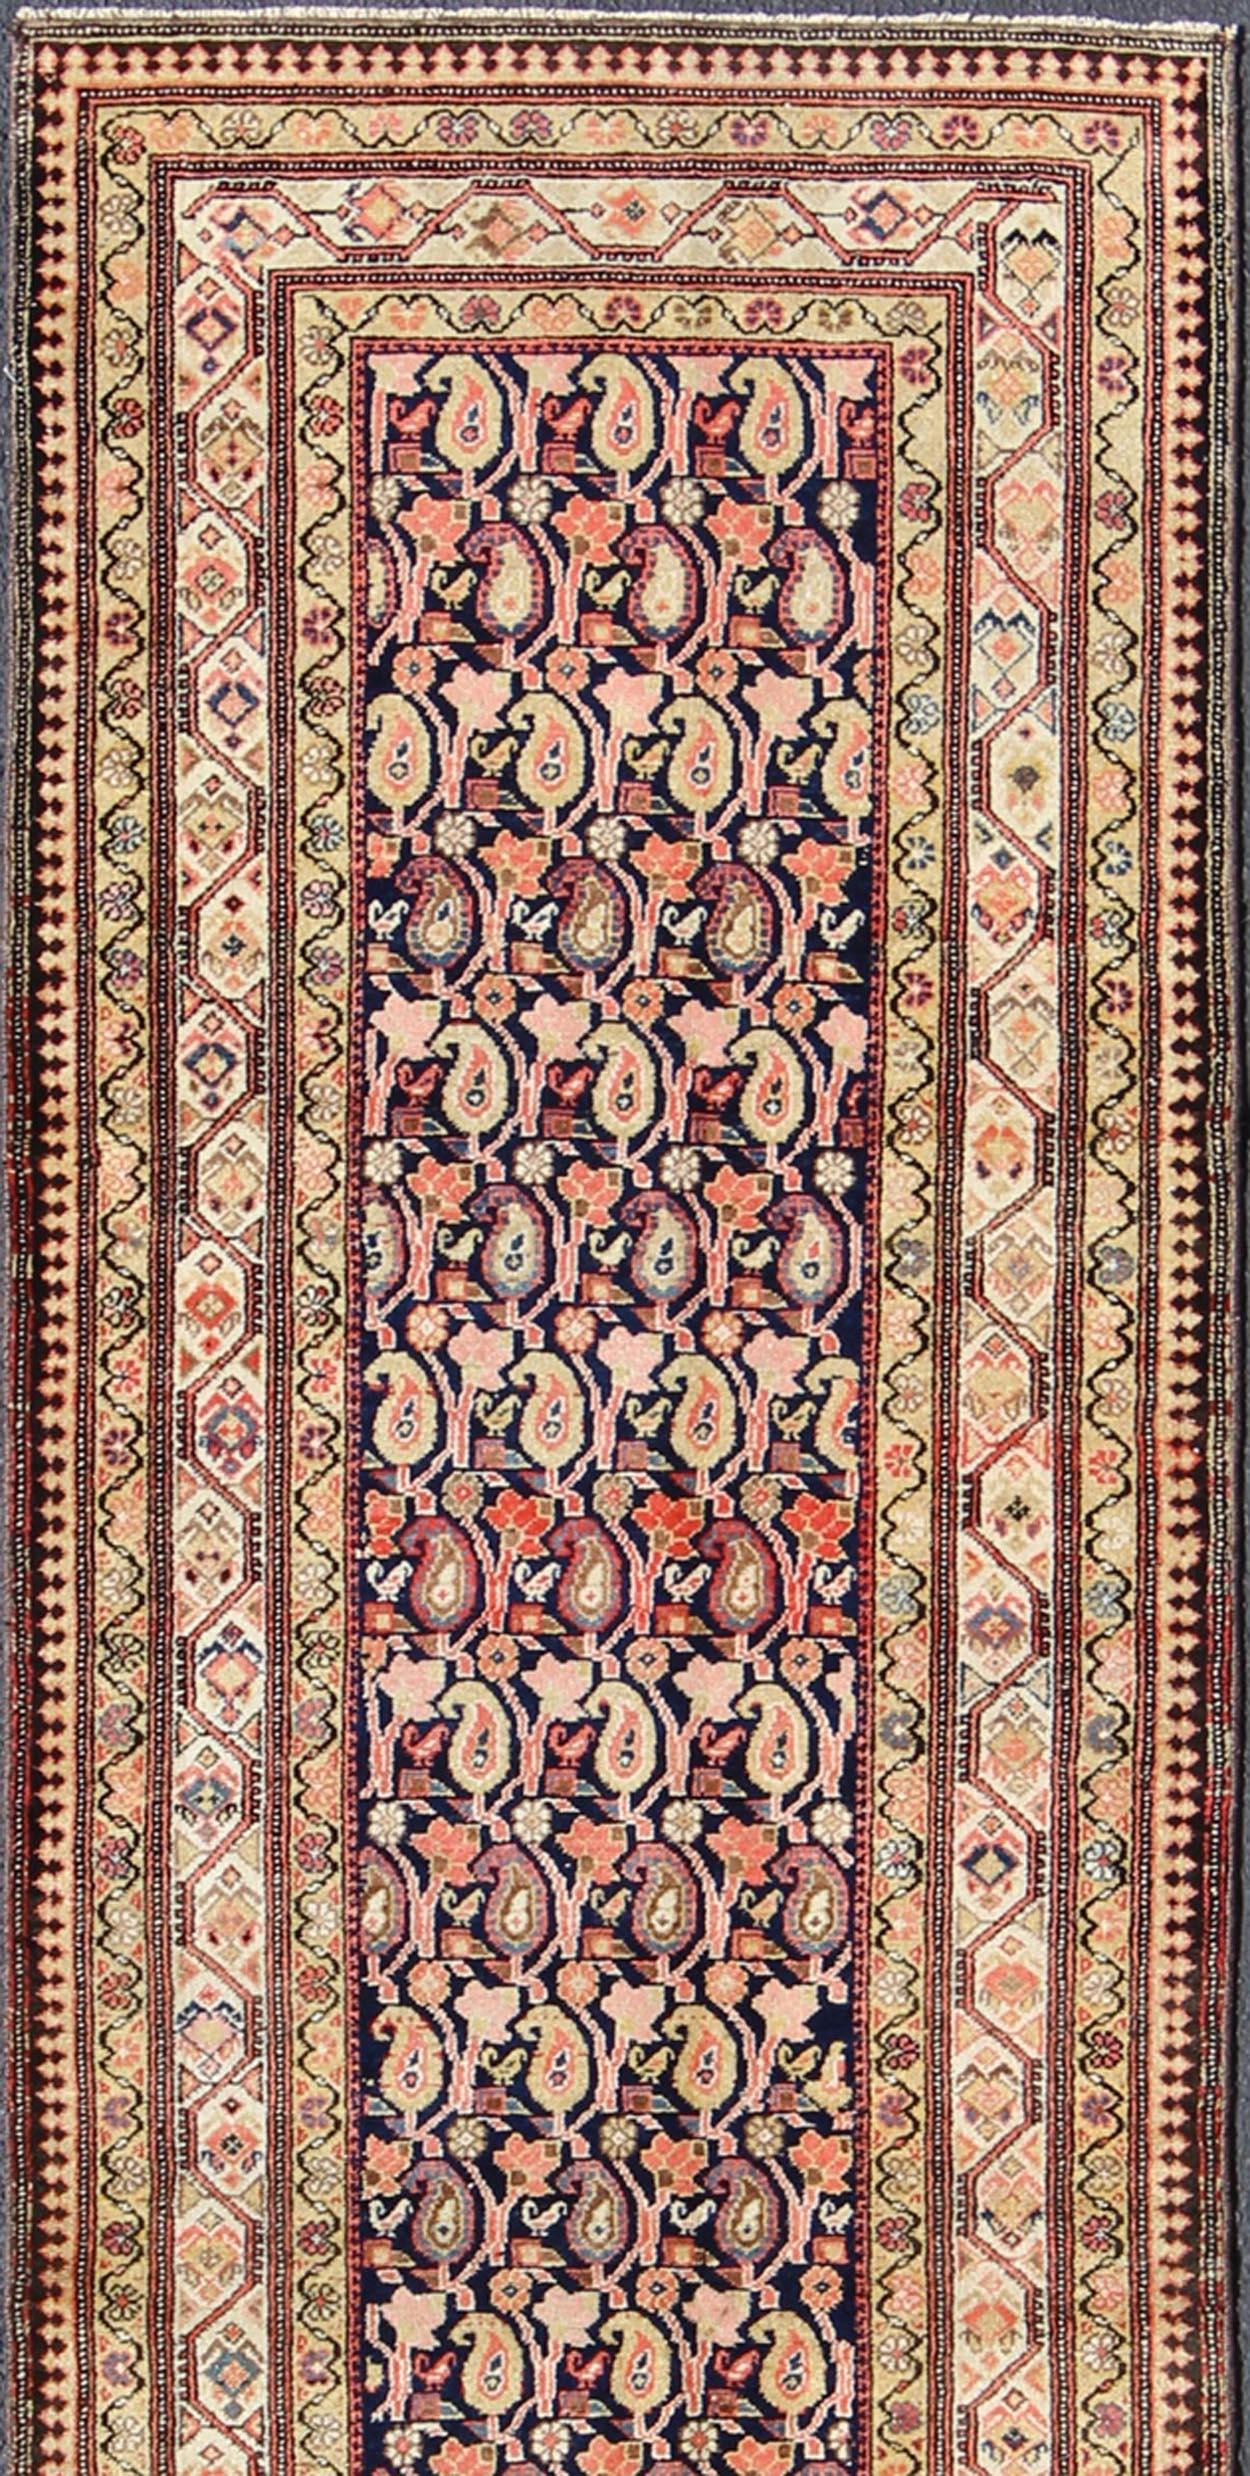 Paisley Design Antique Persian Malayer Runner in Dark and Light Tones In Excellent Condition For Sale In Atlanta, GA